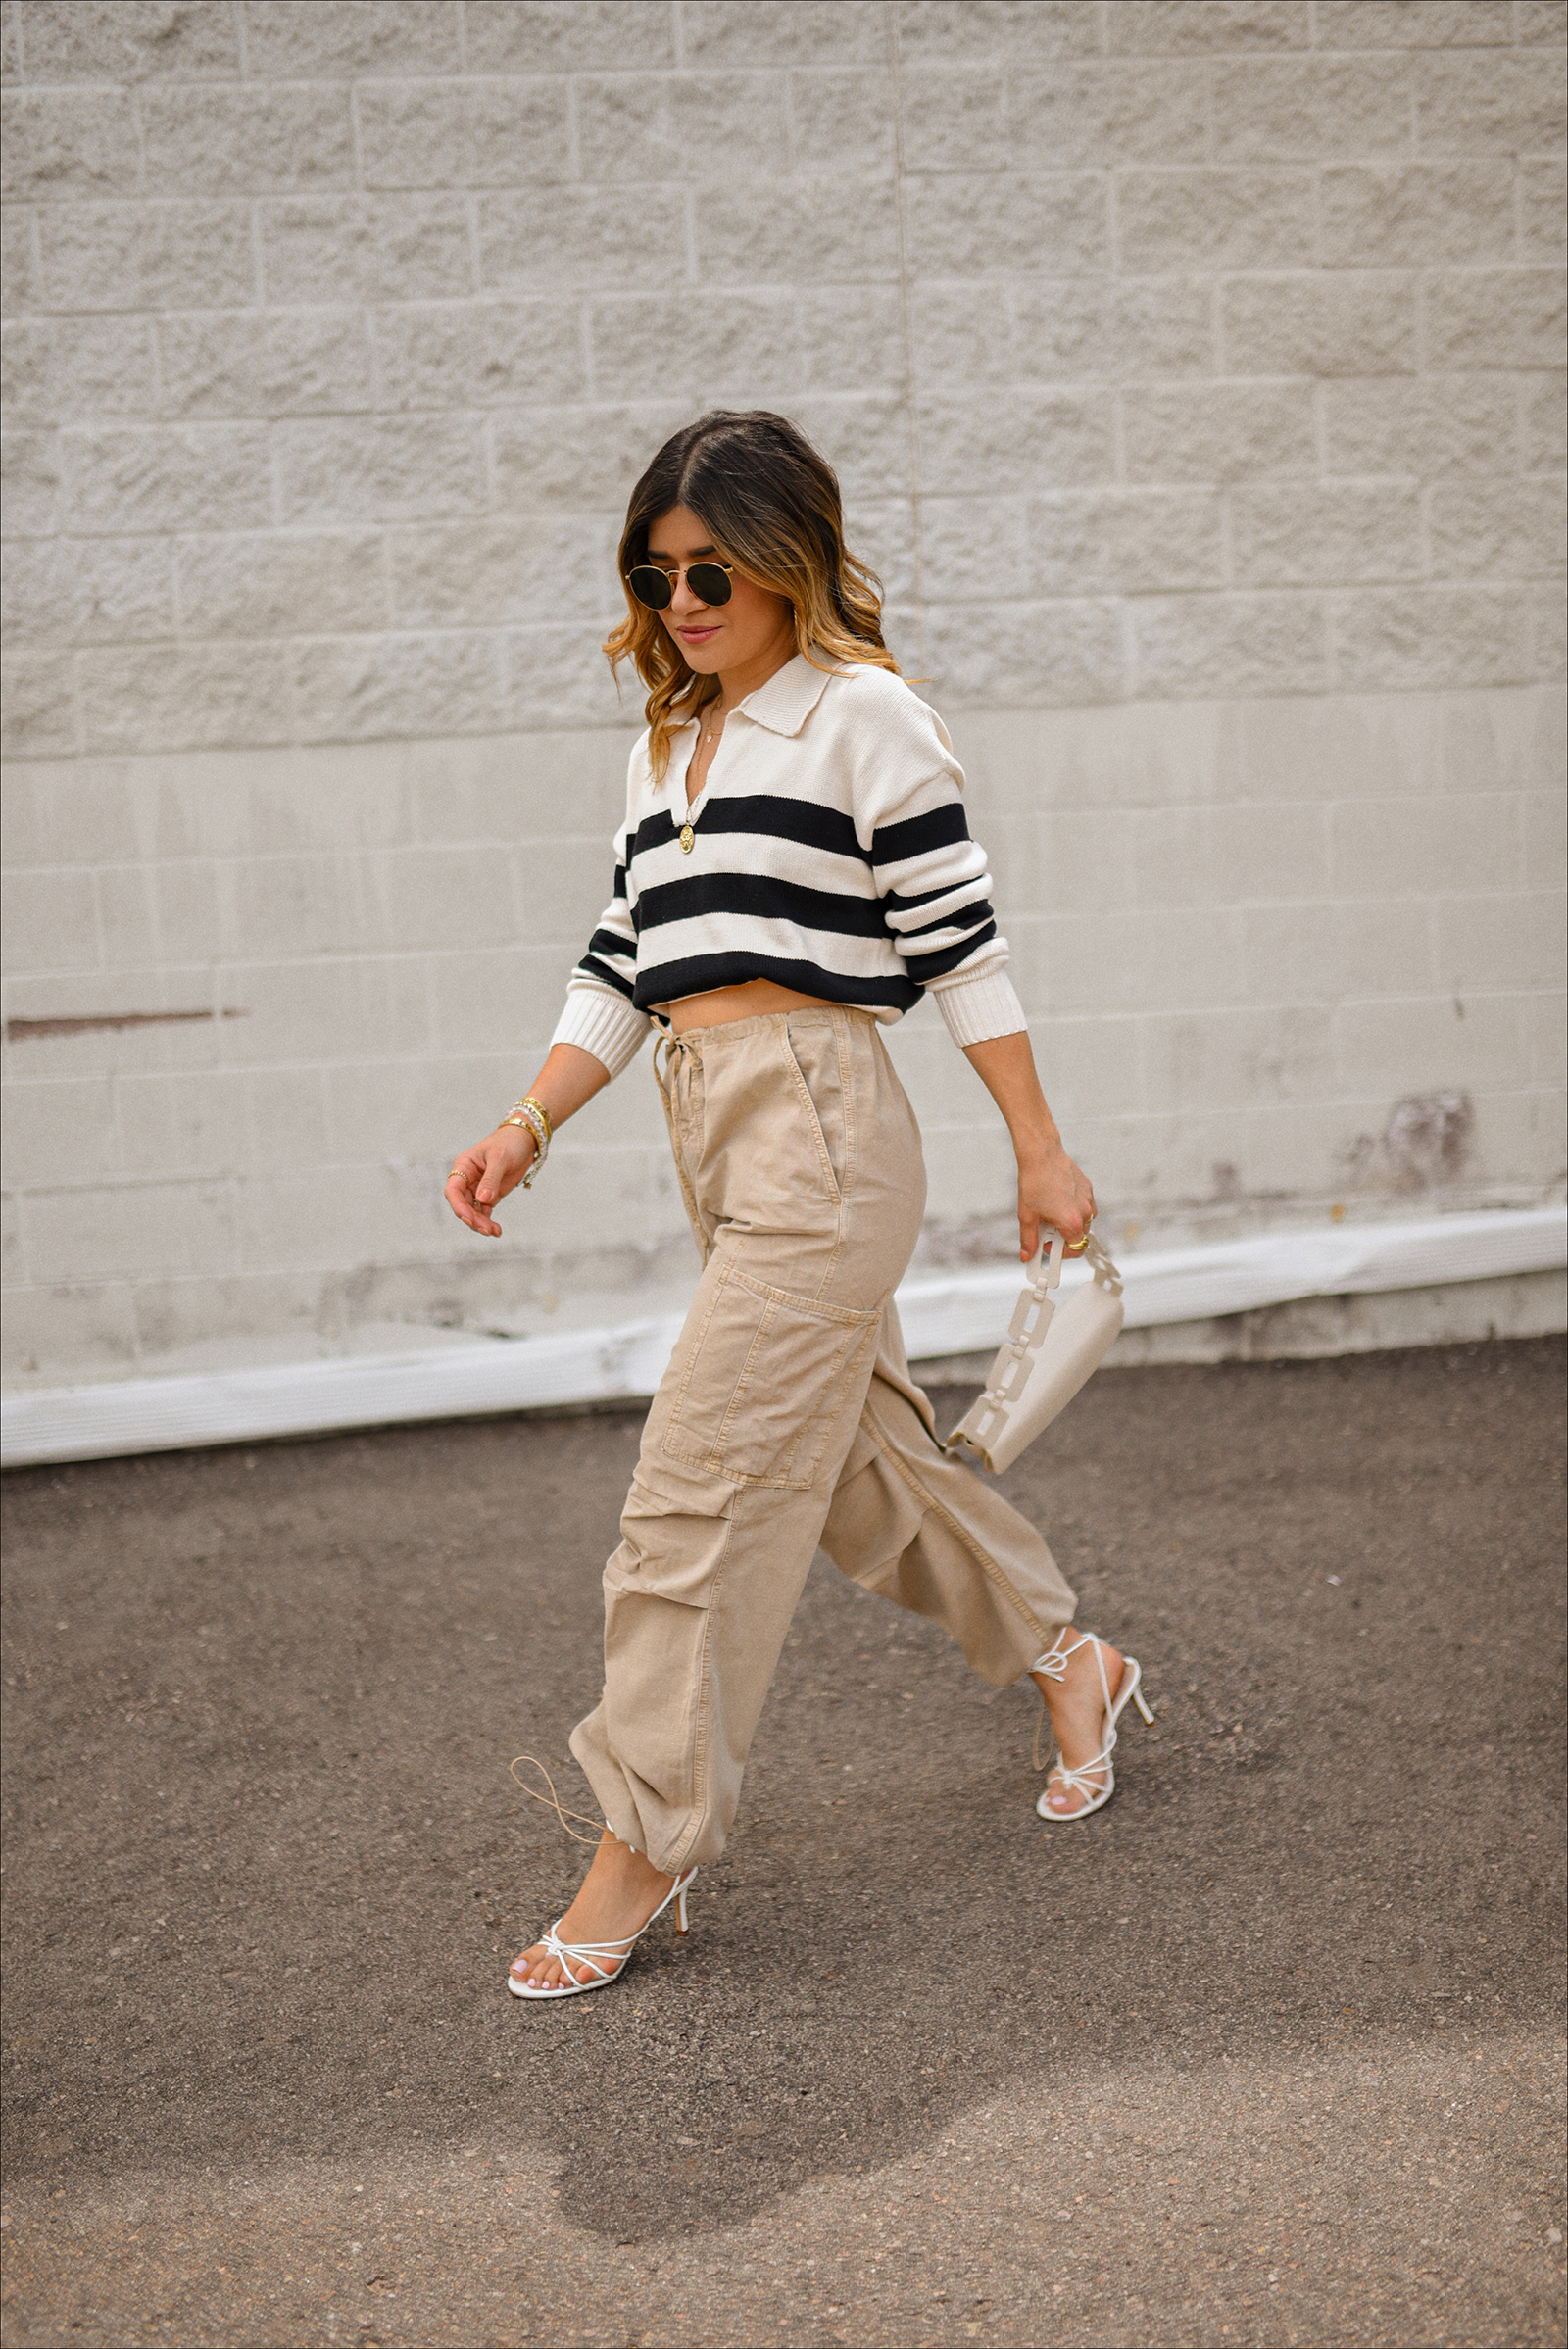 What to wear with black and white striped pants? Outfits and tips